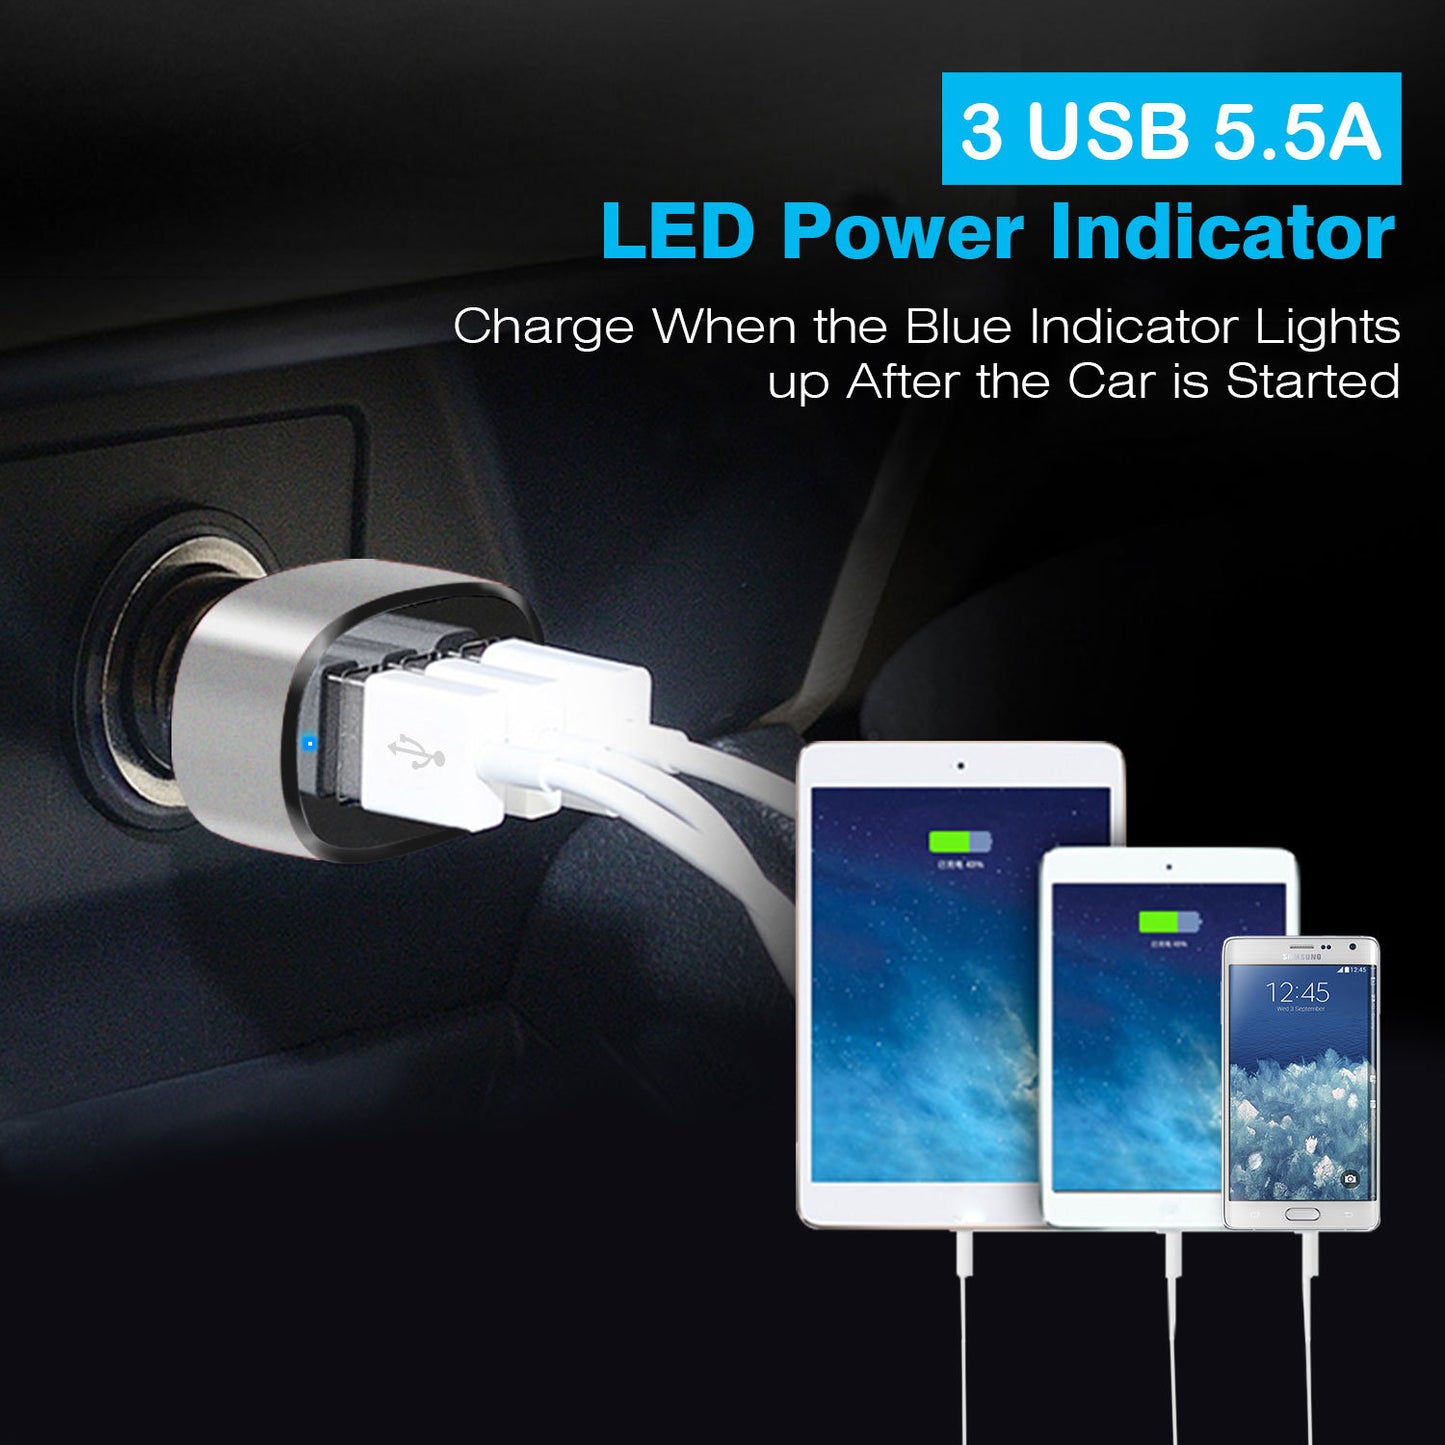 3 USB Port Cigarette Lighter Charger Adapter 30W 5.5A USB Car Charger